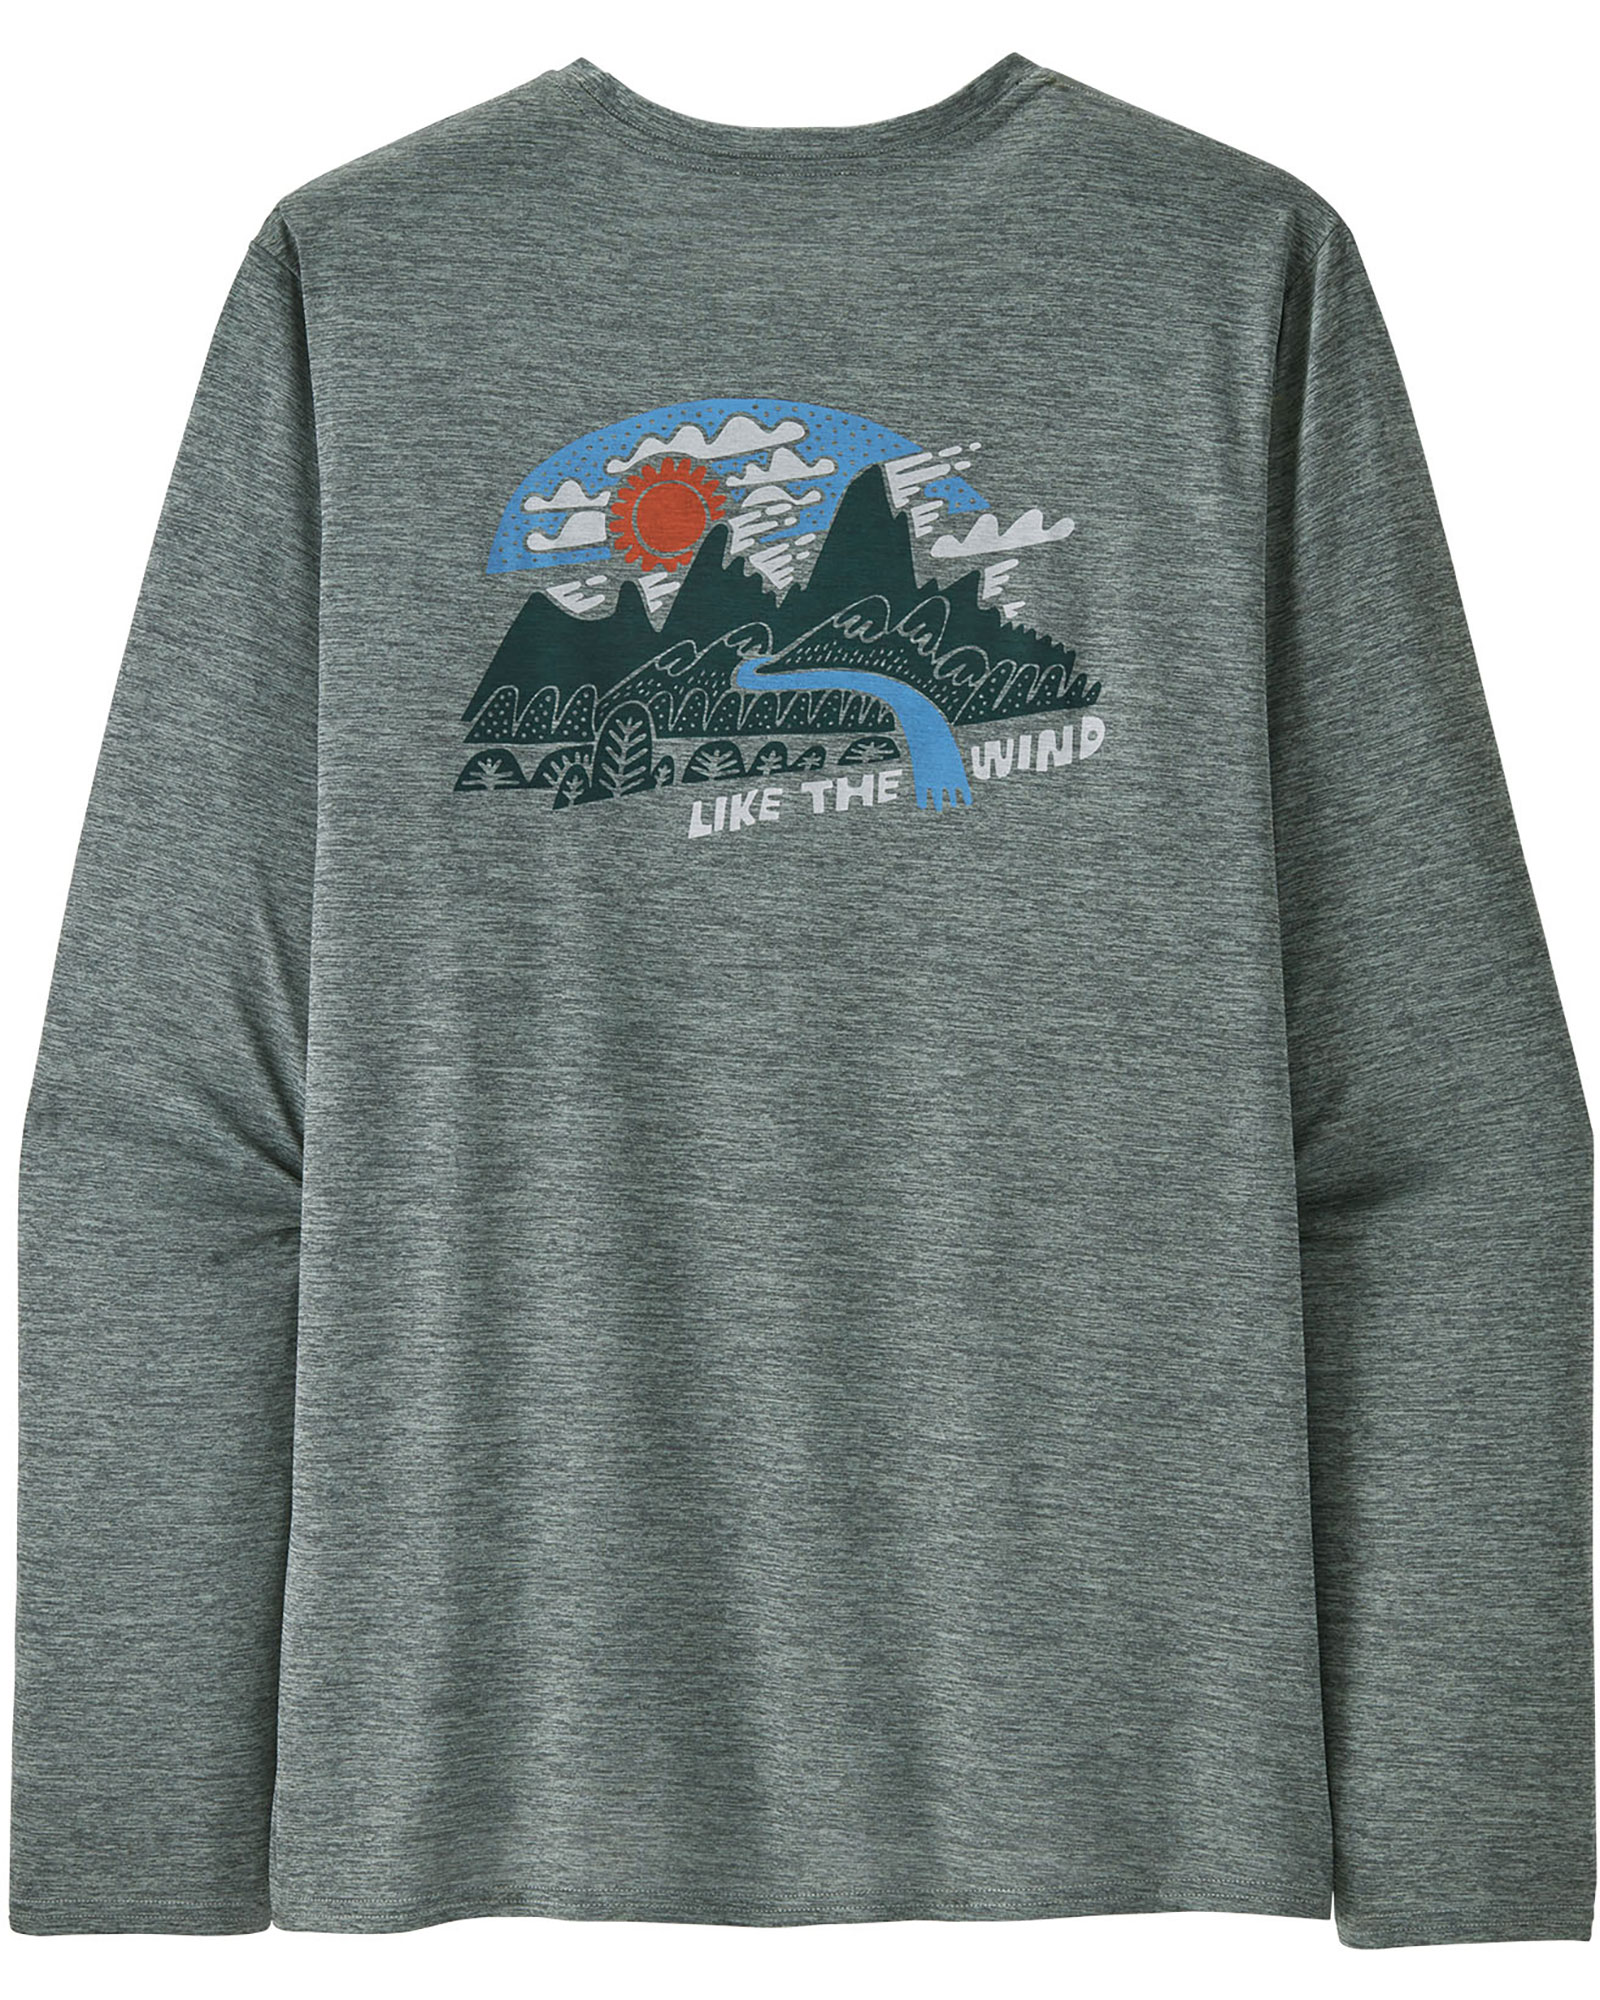 Patagonia Men’s Cap Cool Daily Graphic Long Sleeved Shirt - Like the Wind:Sleet Green X-Dye M